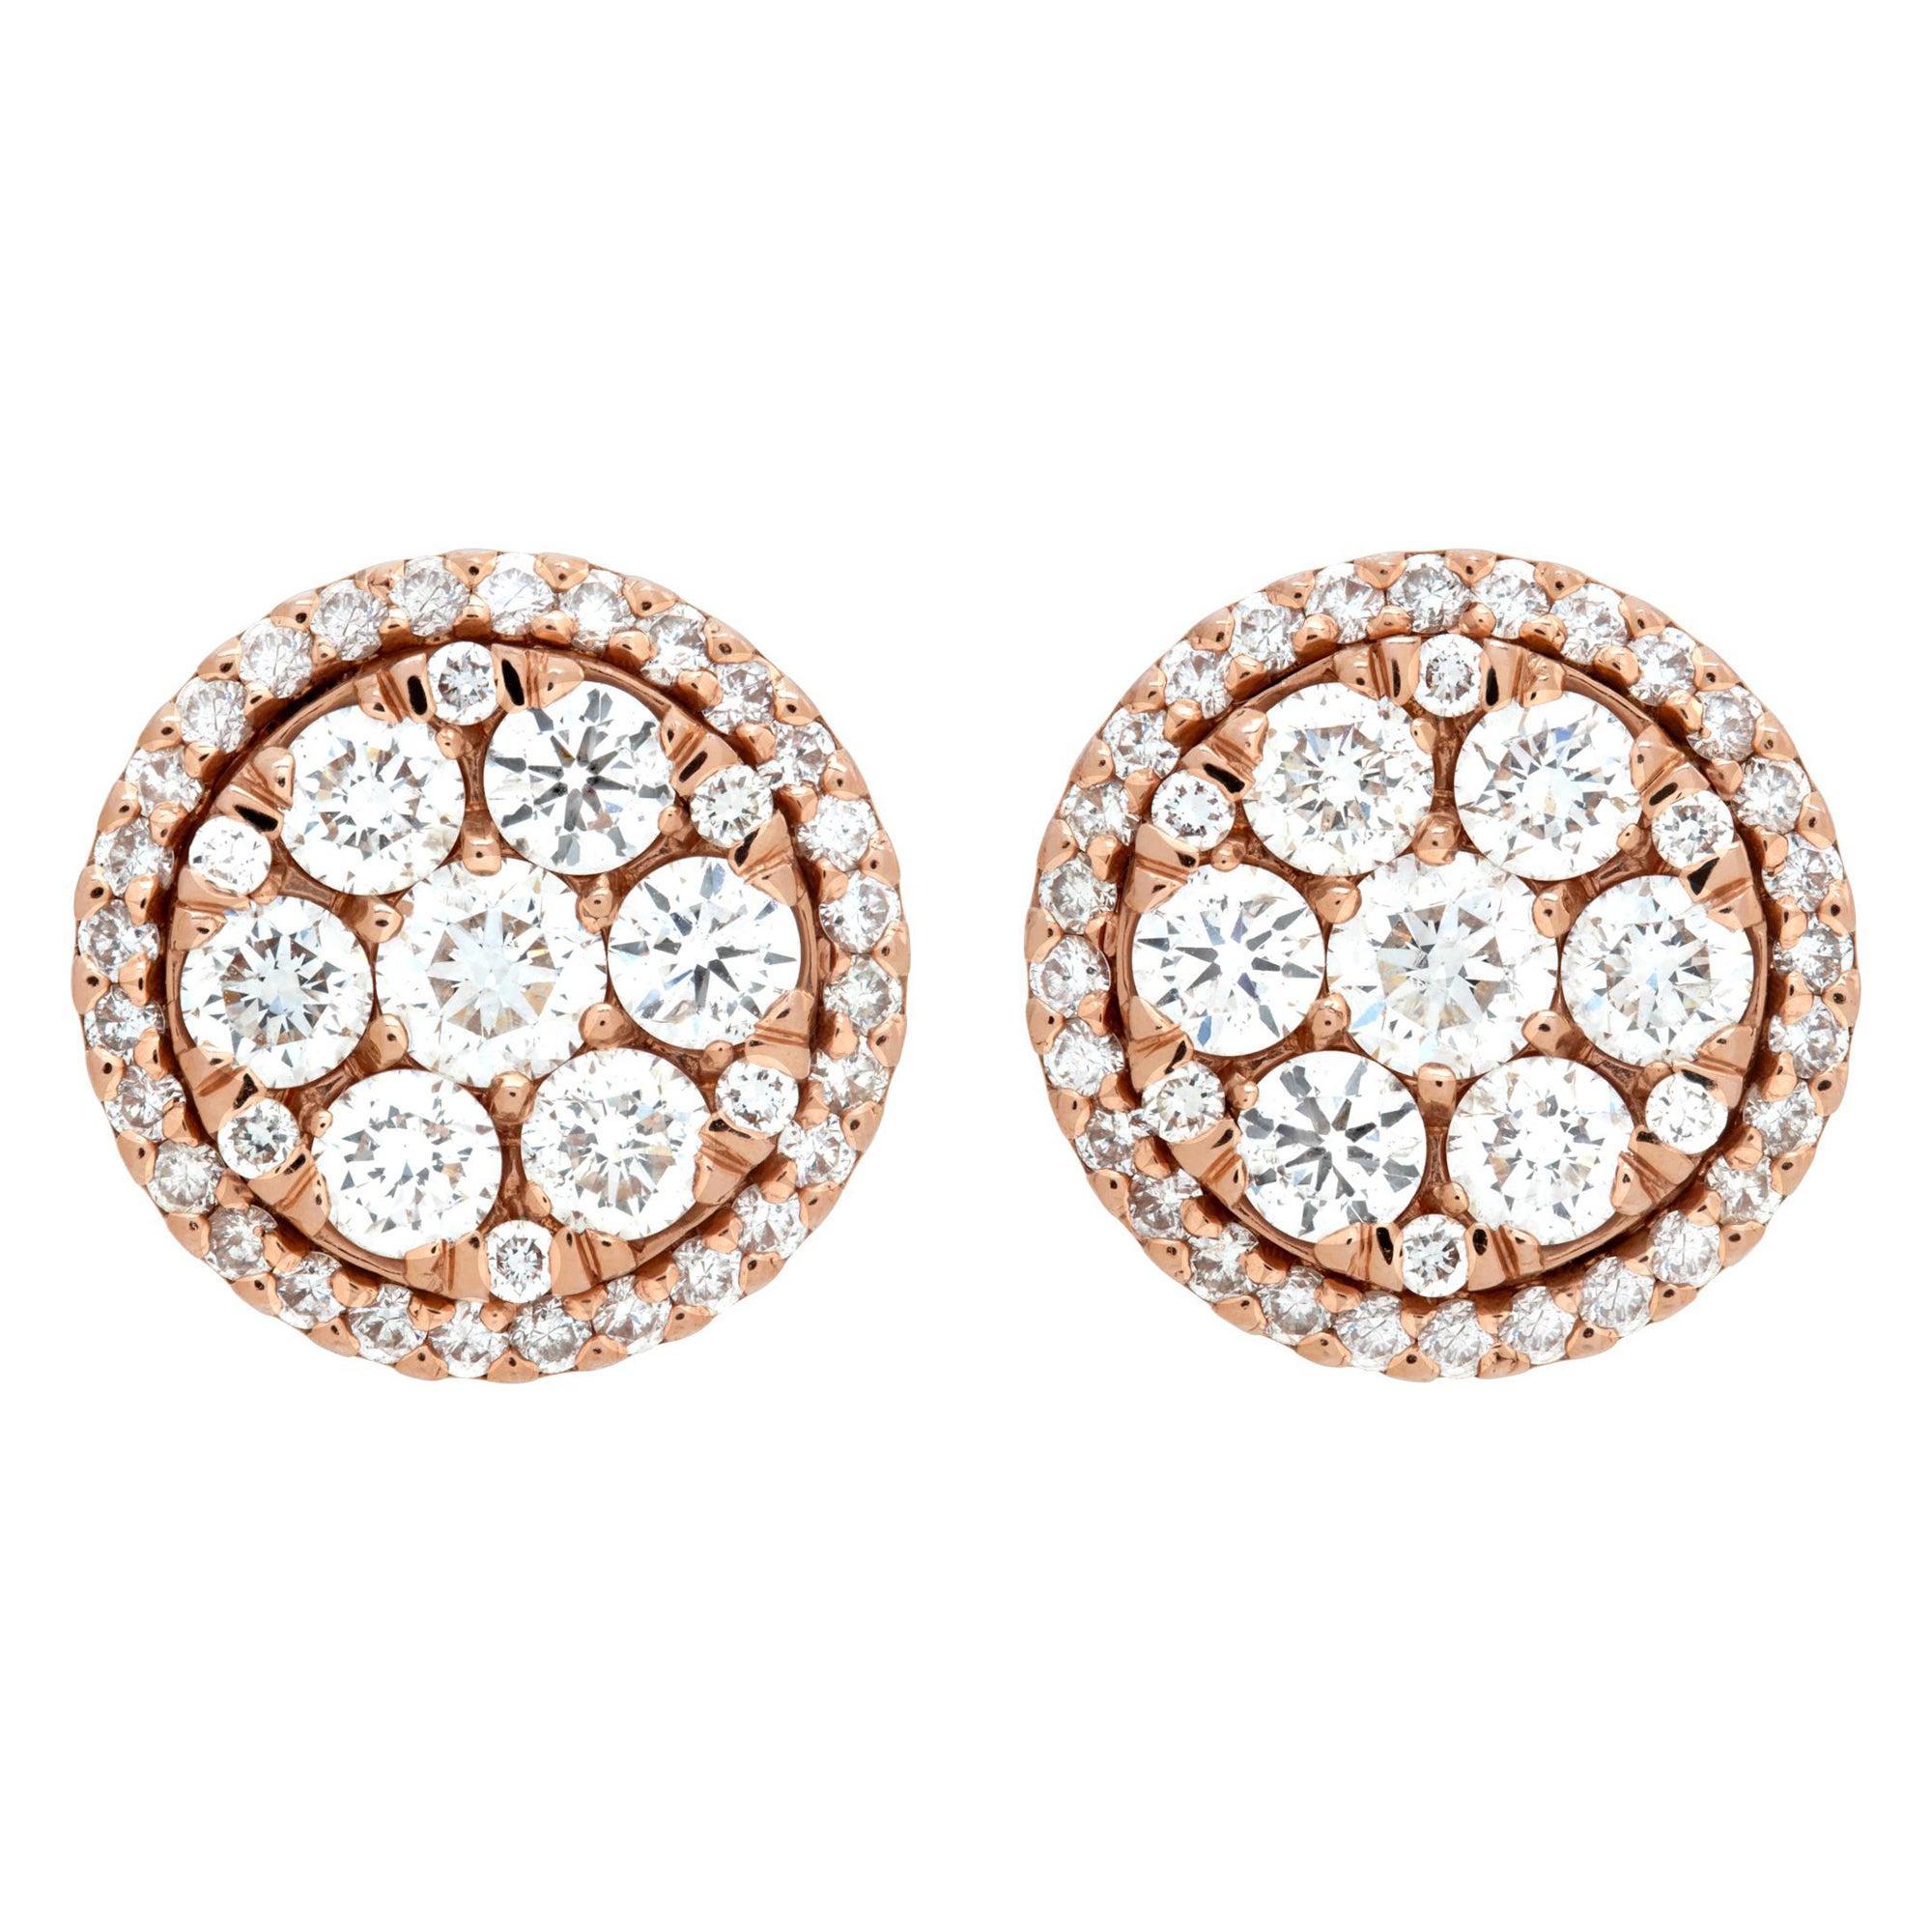 14k Rose Gold Diamond Earring Studs with over 2 Carats Diamonds